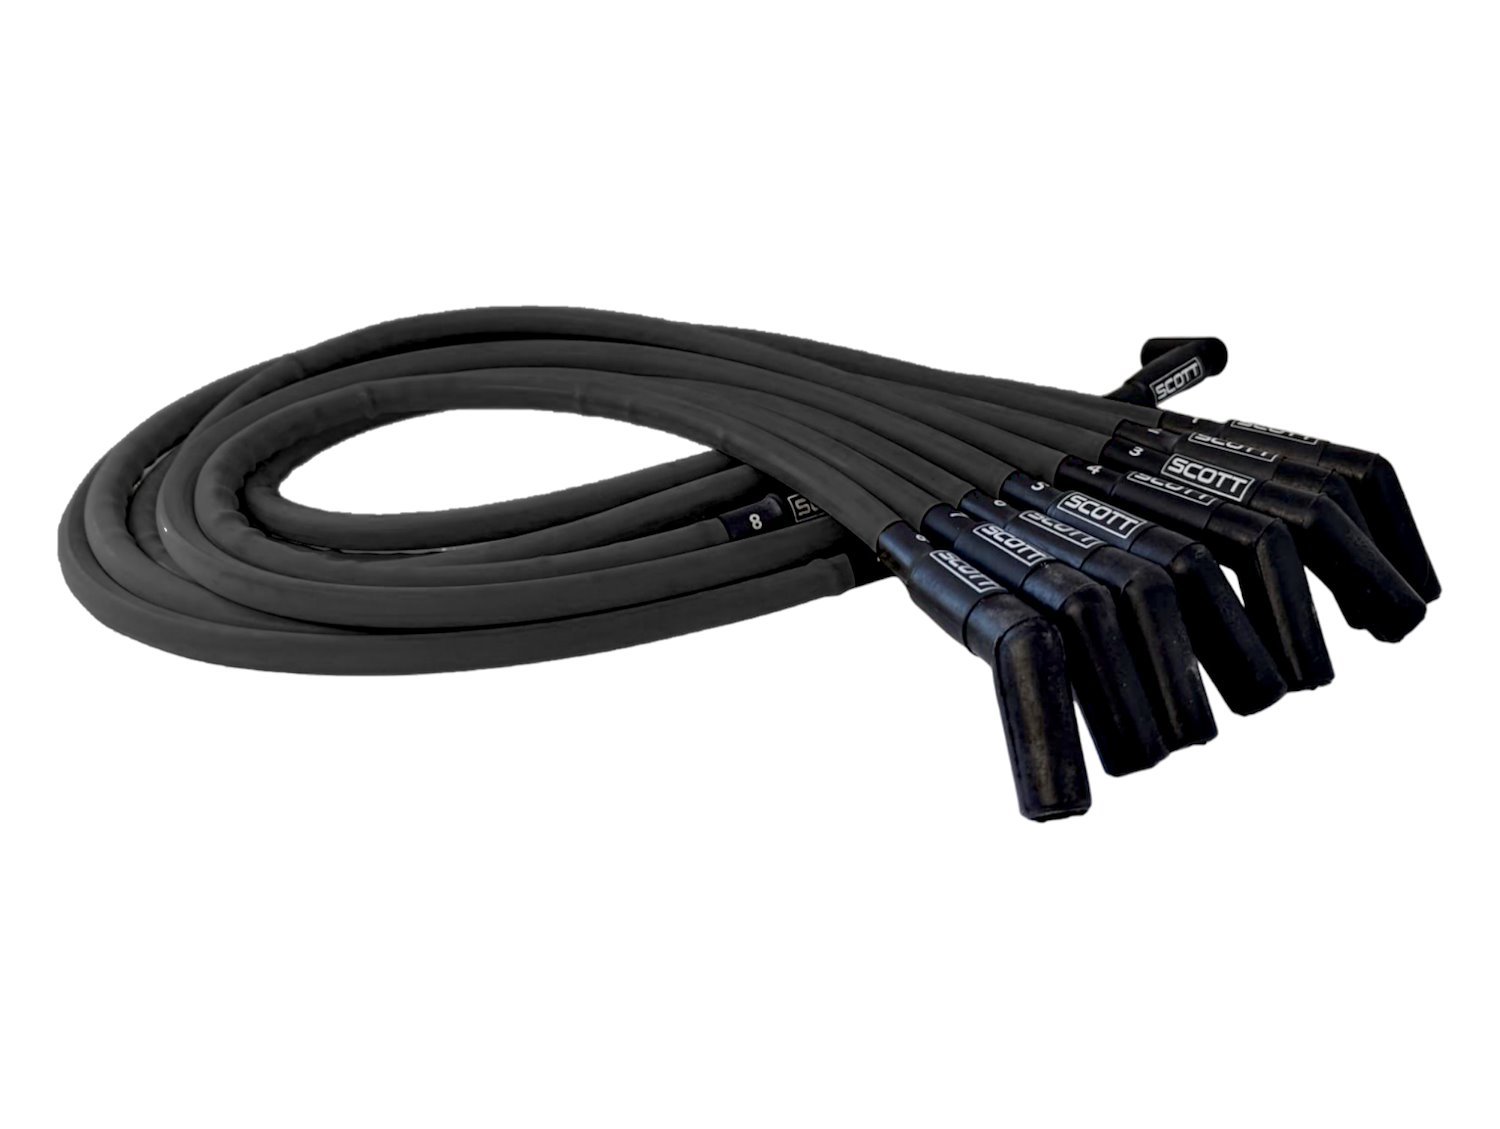 SPW-CH-426-1 High-Performance Silicone-Sleeved Spark Plug Wire Set for Small Block Ford, Over Valve Cover [Black]